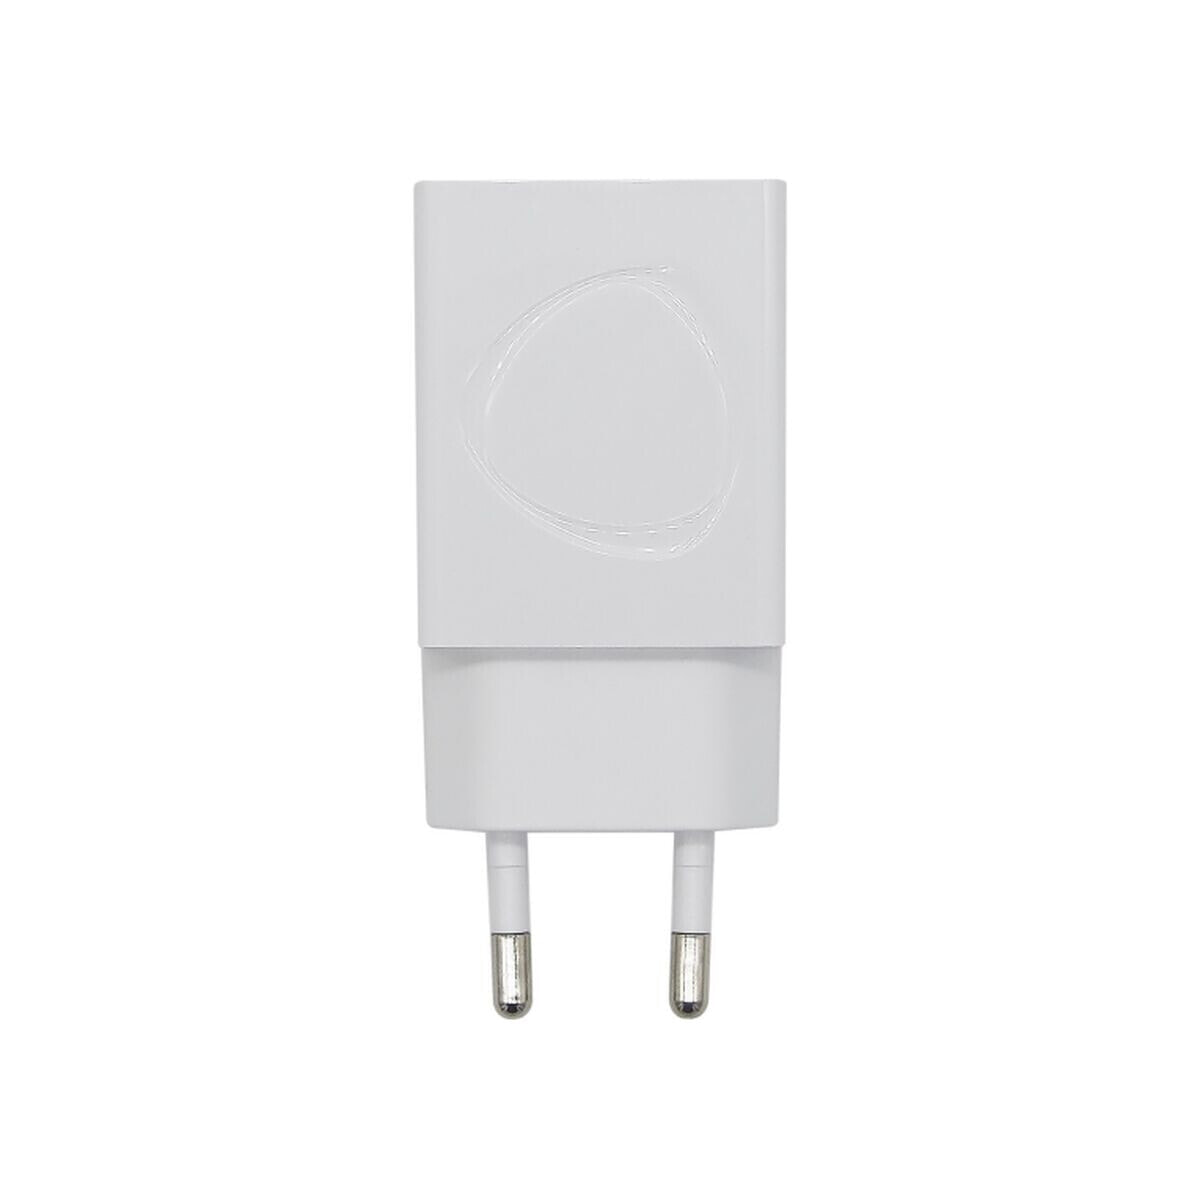 Wall Charger Aisens A110-0404 White 10 W (1 Unit)